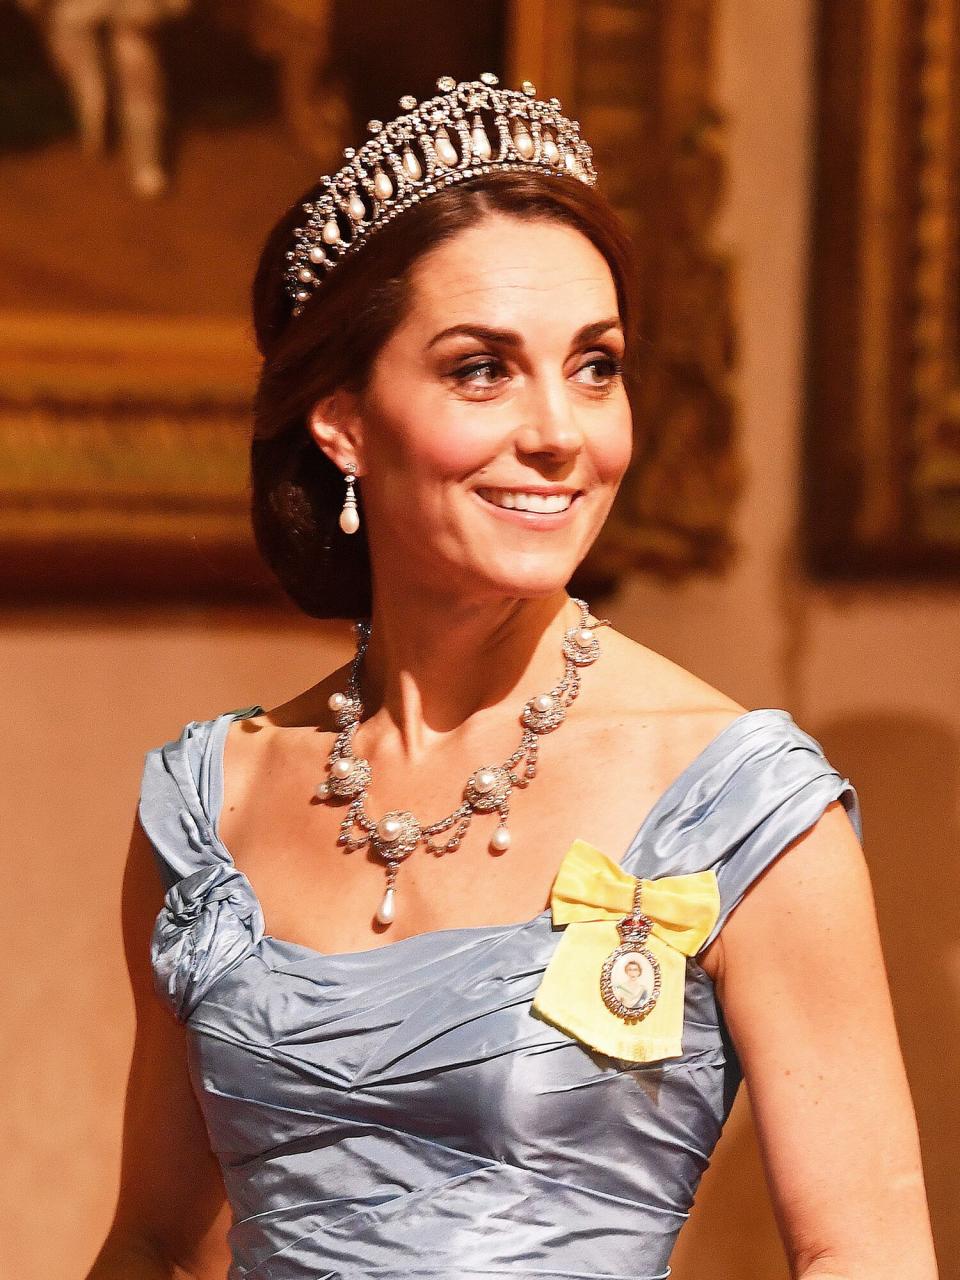 Catherine, Duchess of Cambridge during a State Banquet at Buckingham Palace on October 23, 2018 in London, United Kingdom. King Willem-Alexander of the Netherlands accompanied by Queen Maxima are staying at Buckingham Palace during their two day stay in the UK. The last State Visit from the Netherlands was by Queen Beatrix and Prince Claus in 1982